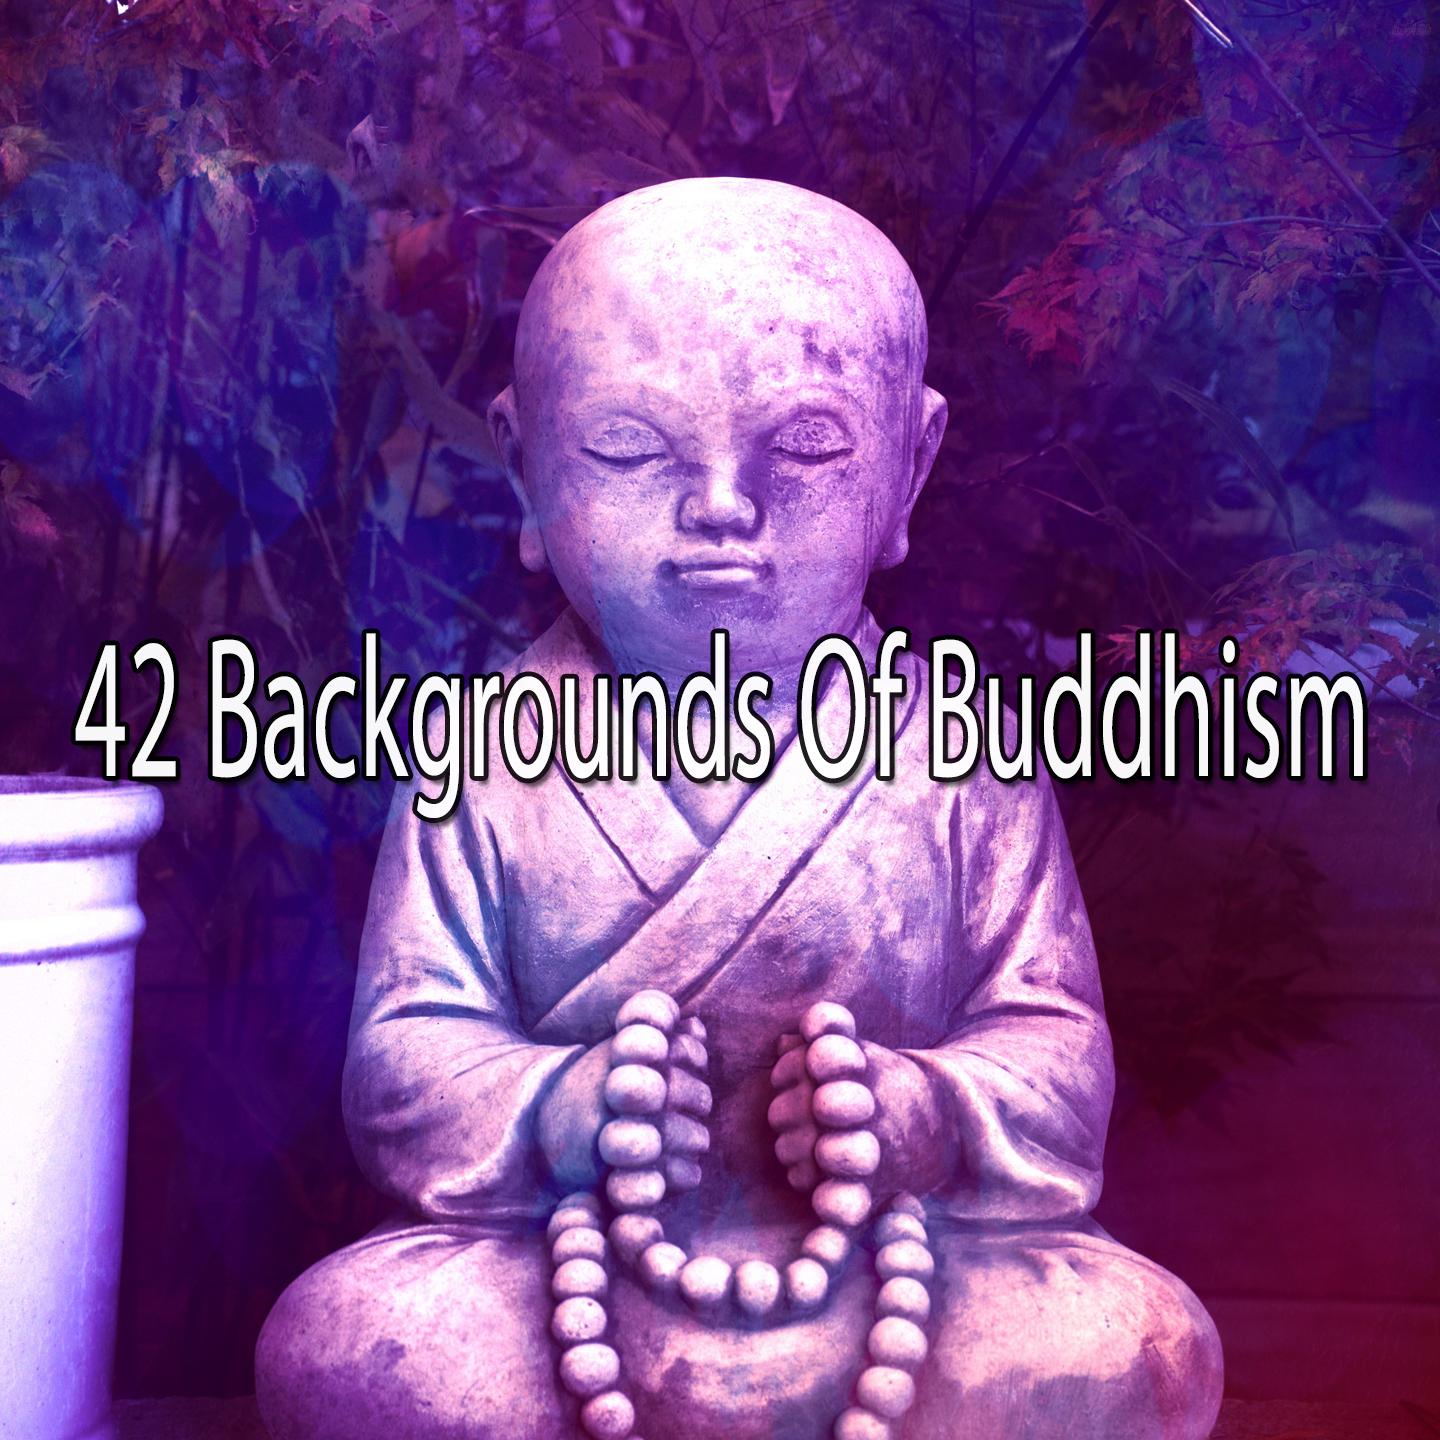 42 Backgrounds of Buddhism